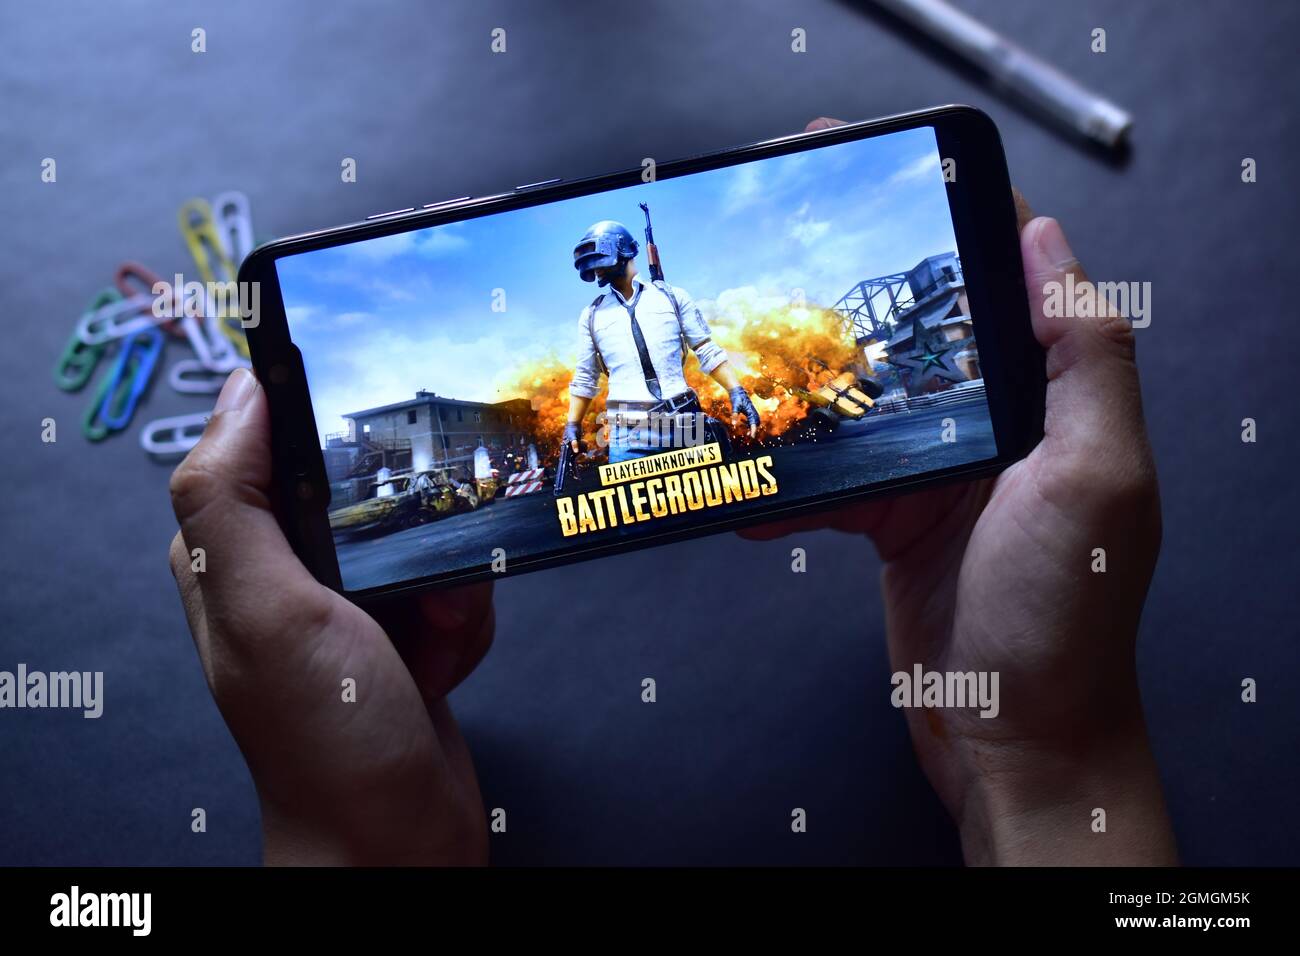 INDIA, DELHI - October 19, 2019: pubg game on Android smartphone, playing pubg on mobile phone, smartphone gaming concept Stock Photo